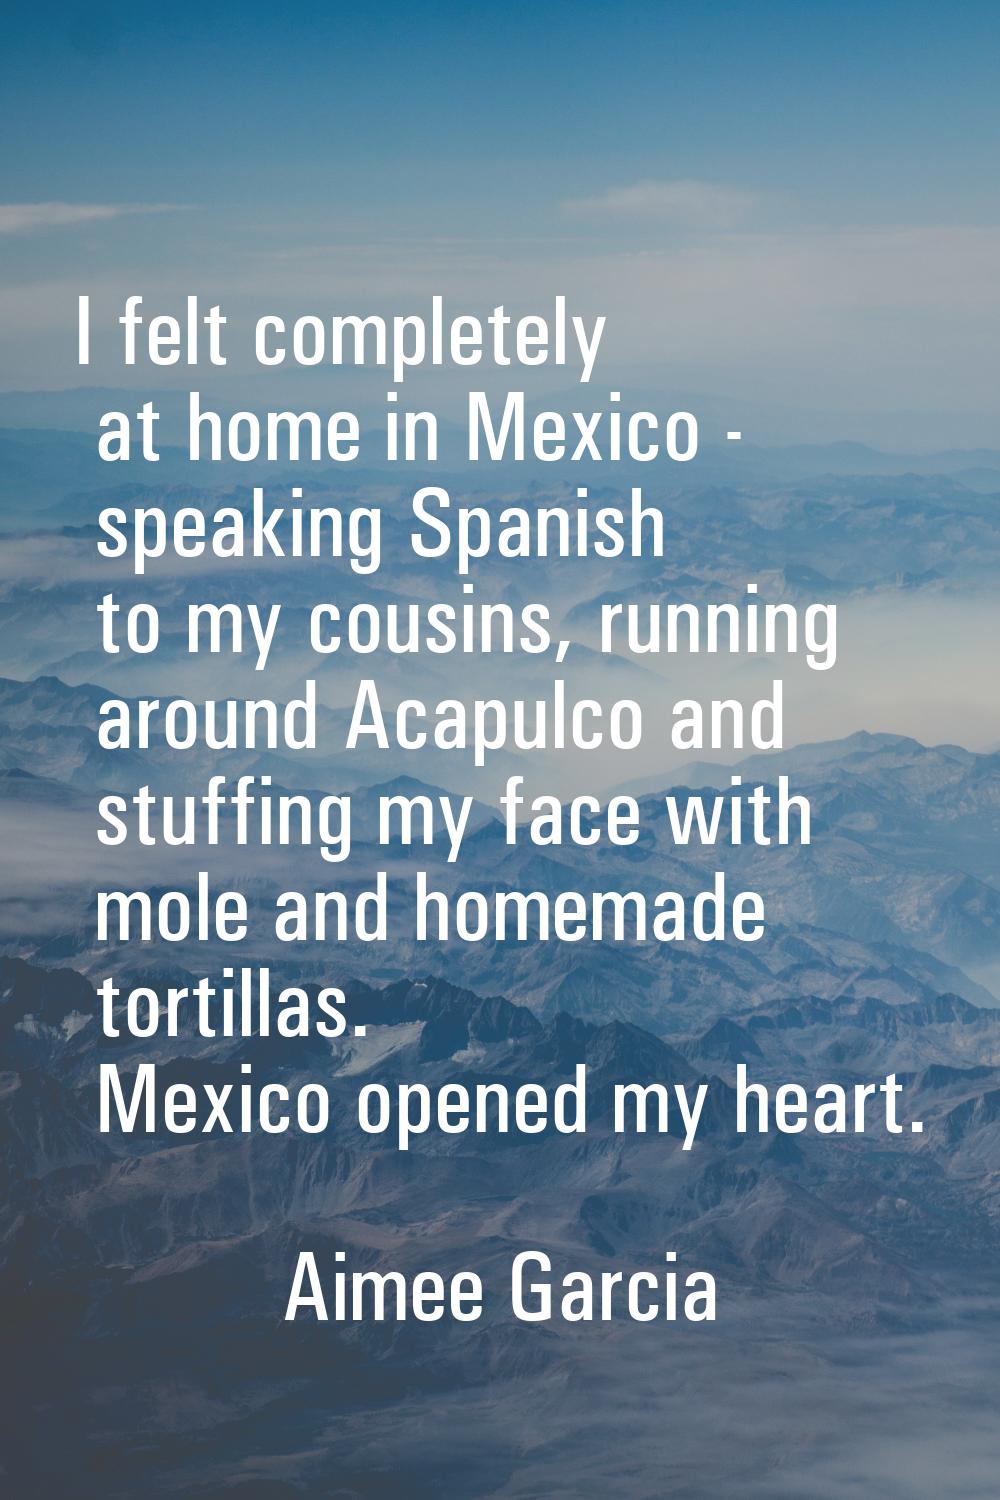 I felt completely at home in Mexico - speaking Spanish to my cousins, running around Acapulco and s